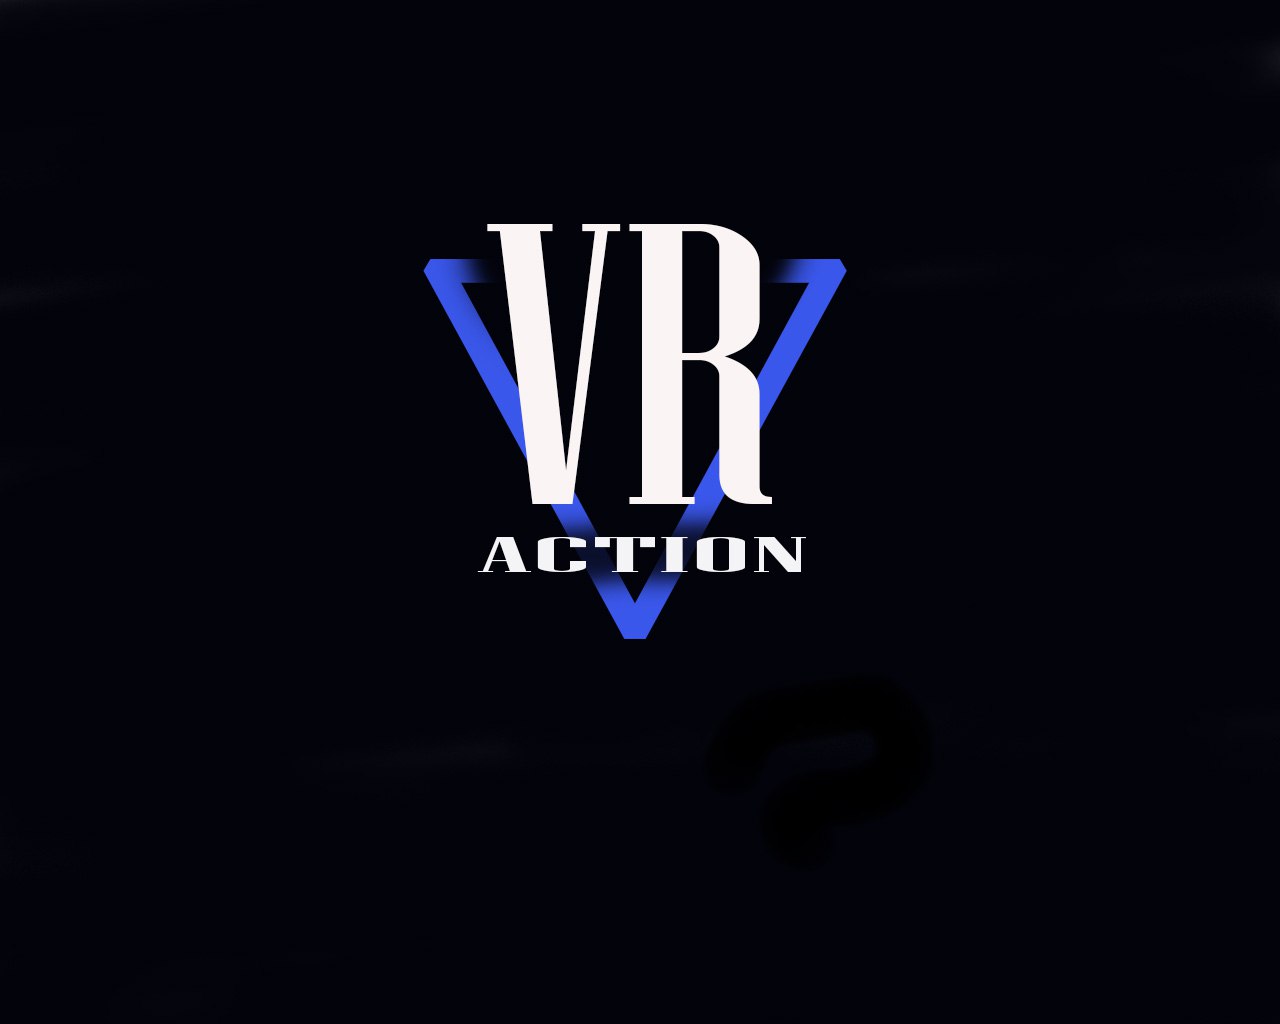 Action VR